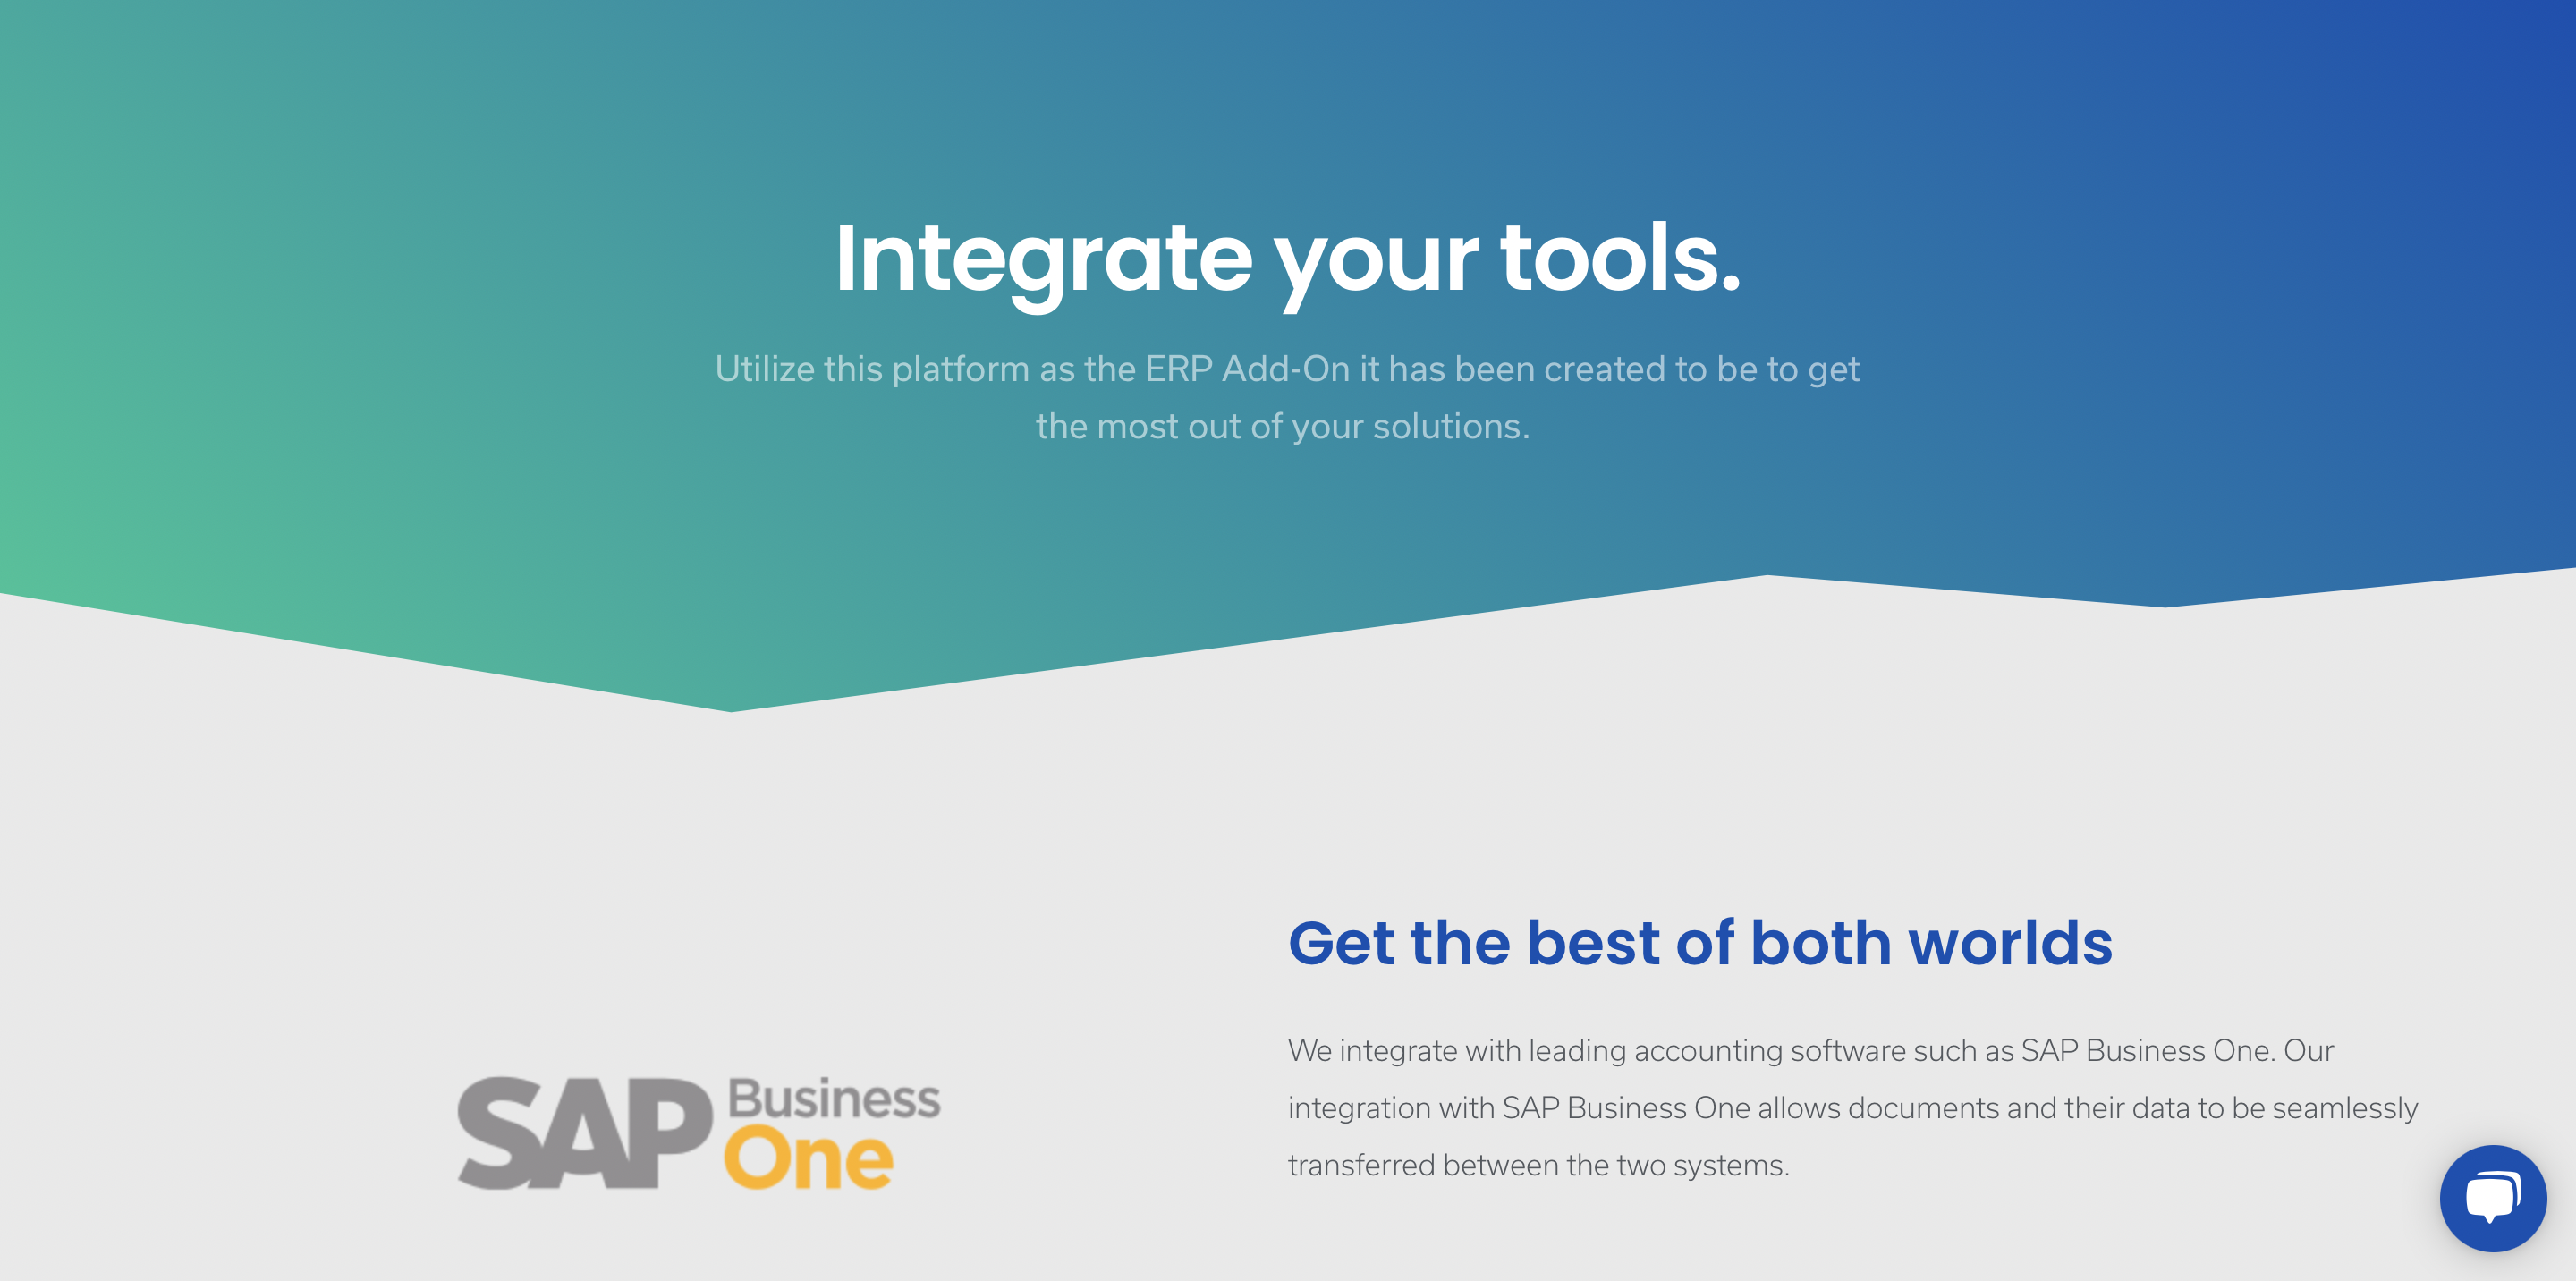 sap business one integrations